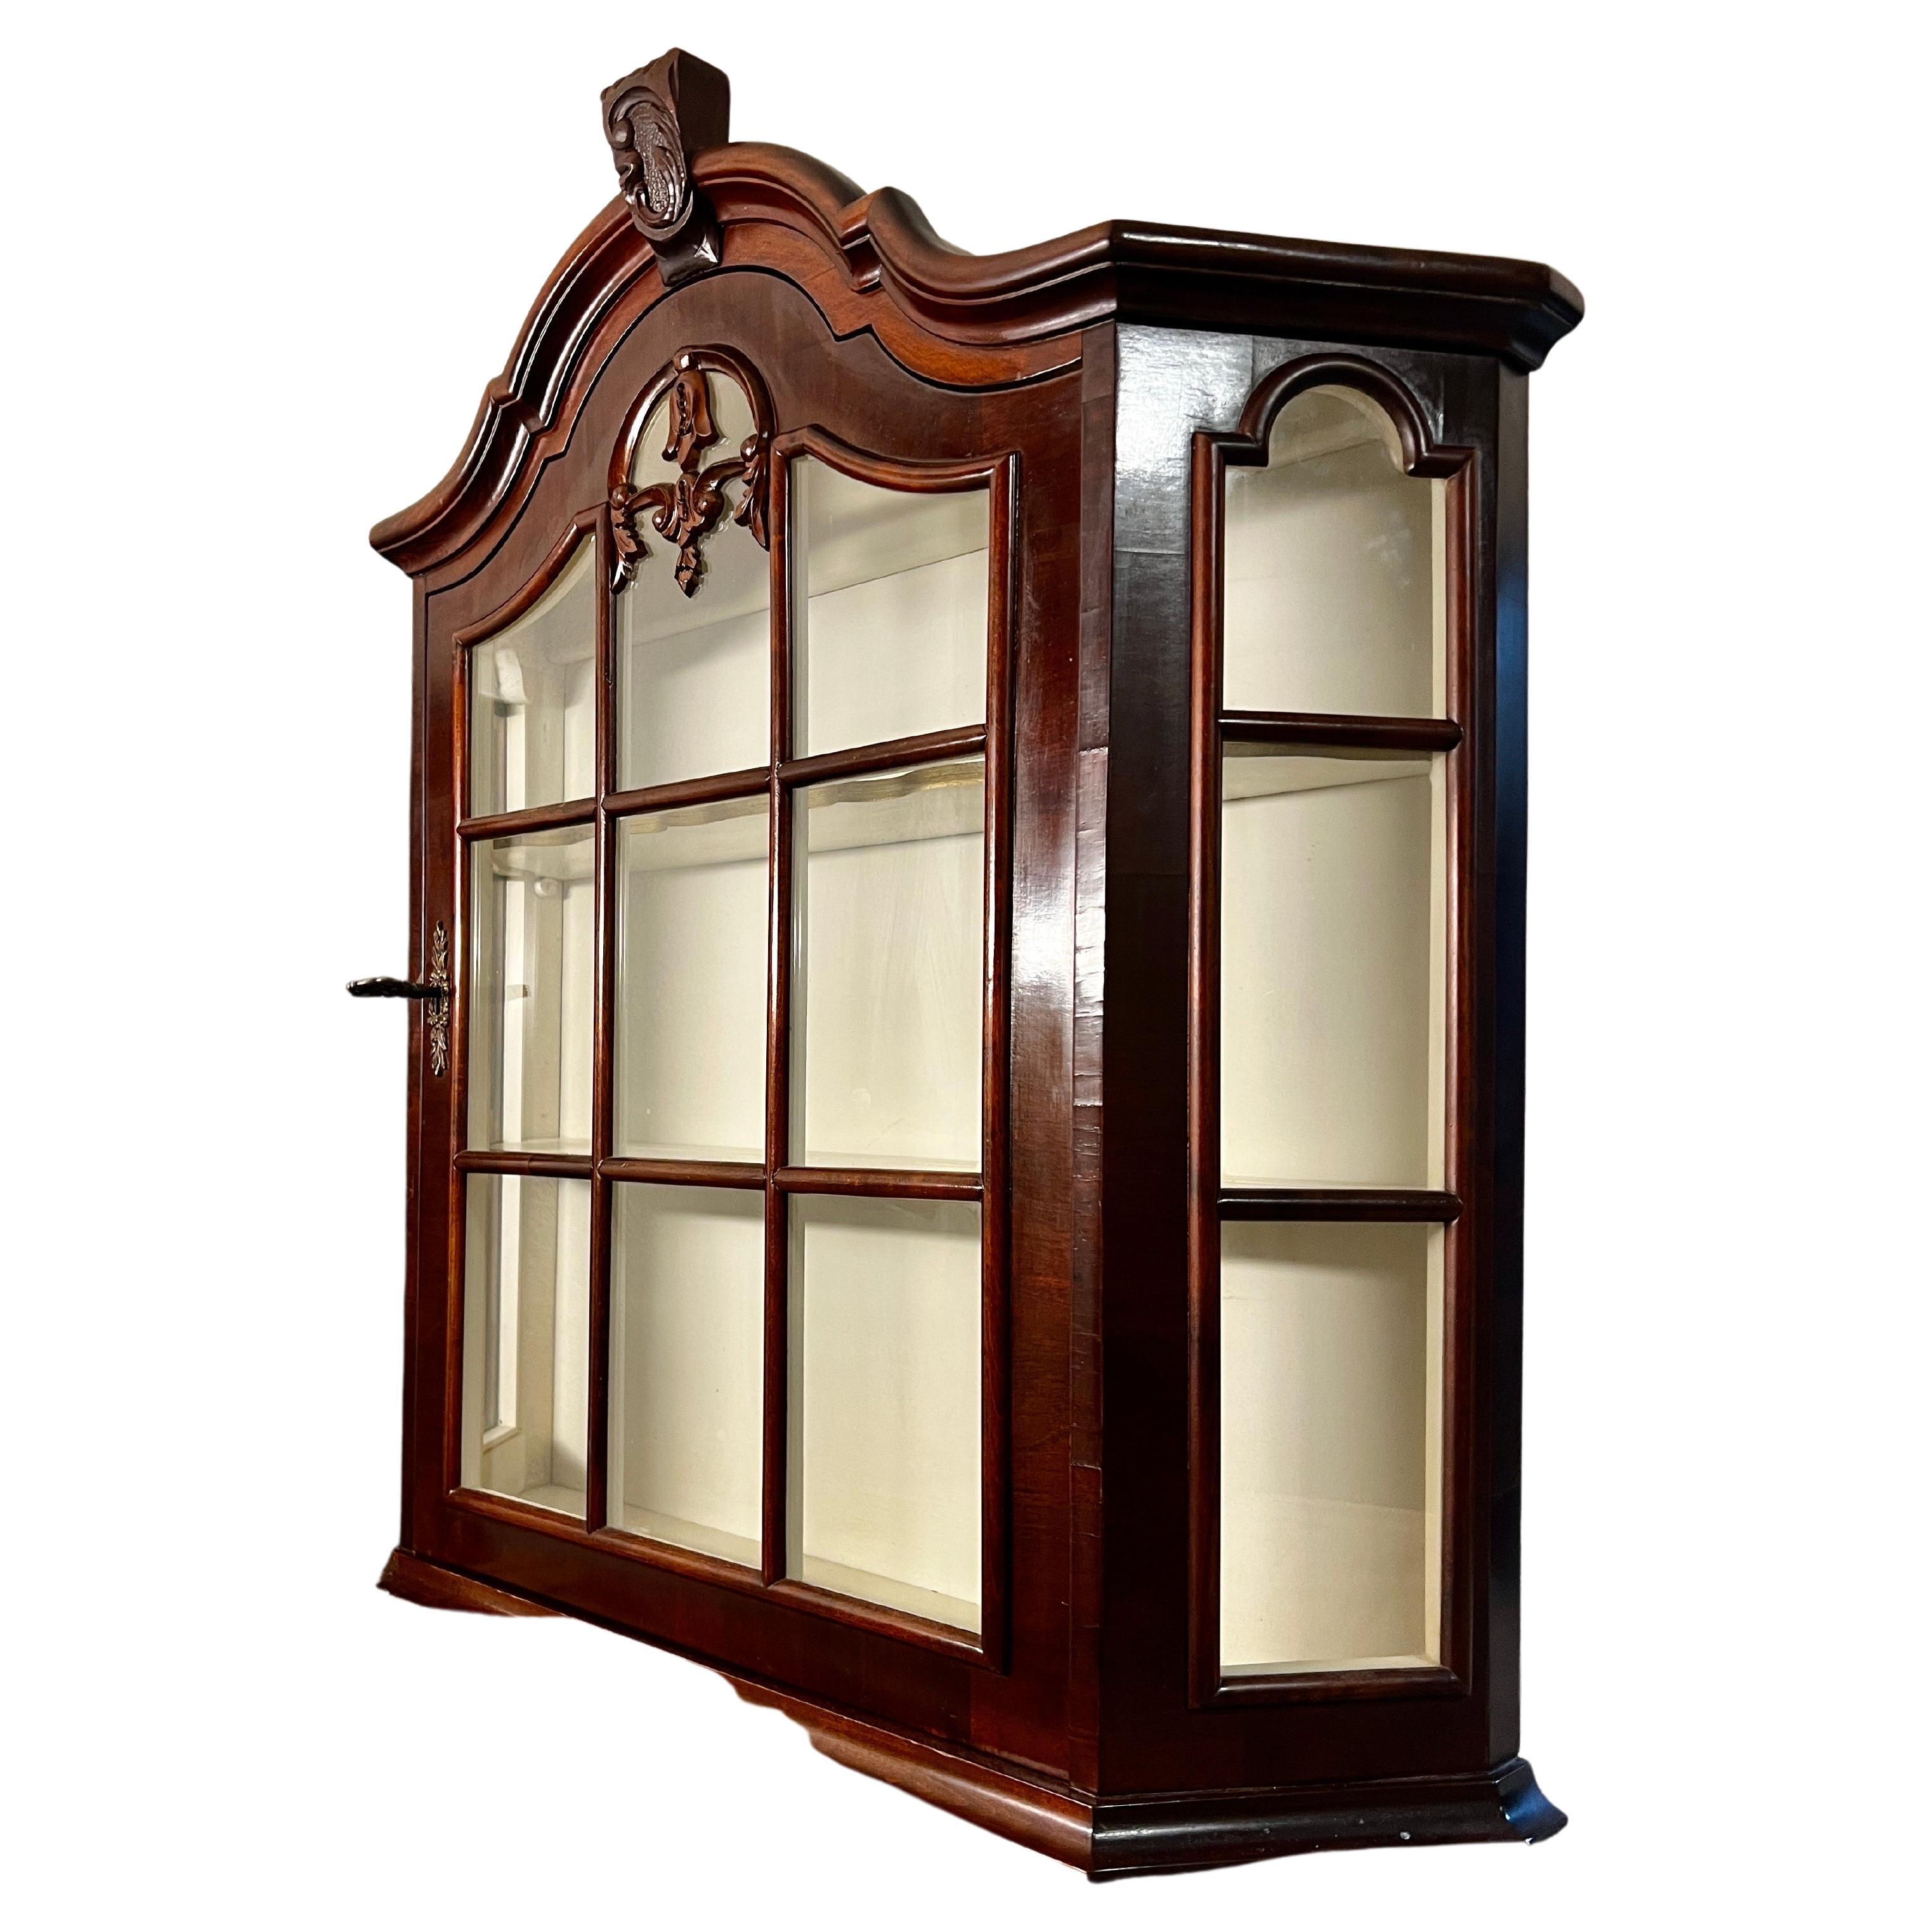 A delightful vintage glass front china or curio cabinet in Rococo Stylepossesses a beautifully carved pediment, allowing it to be displayed on a counter or wall-mounted with elegance. Made in 20th century and crafted in traditional mahogany,